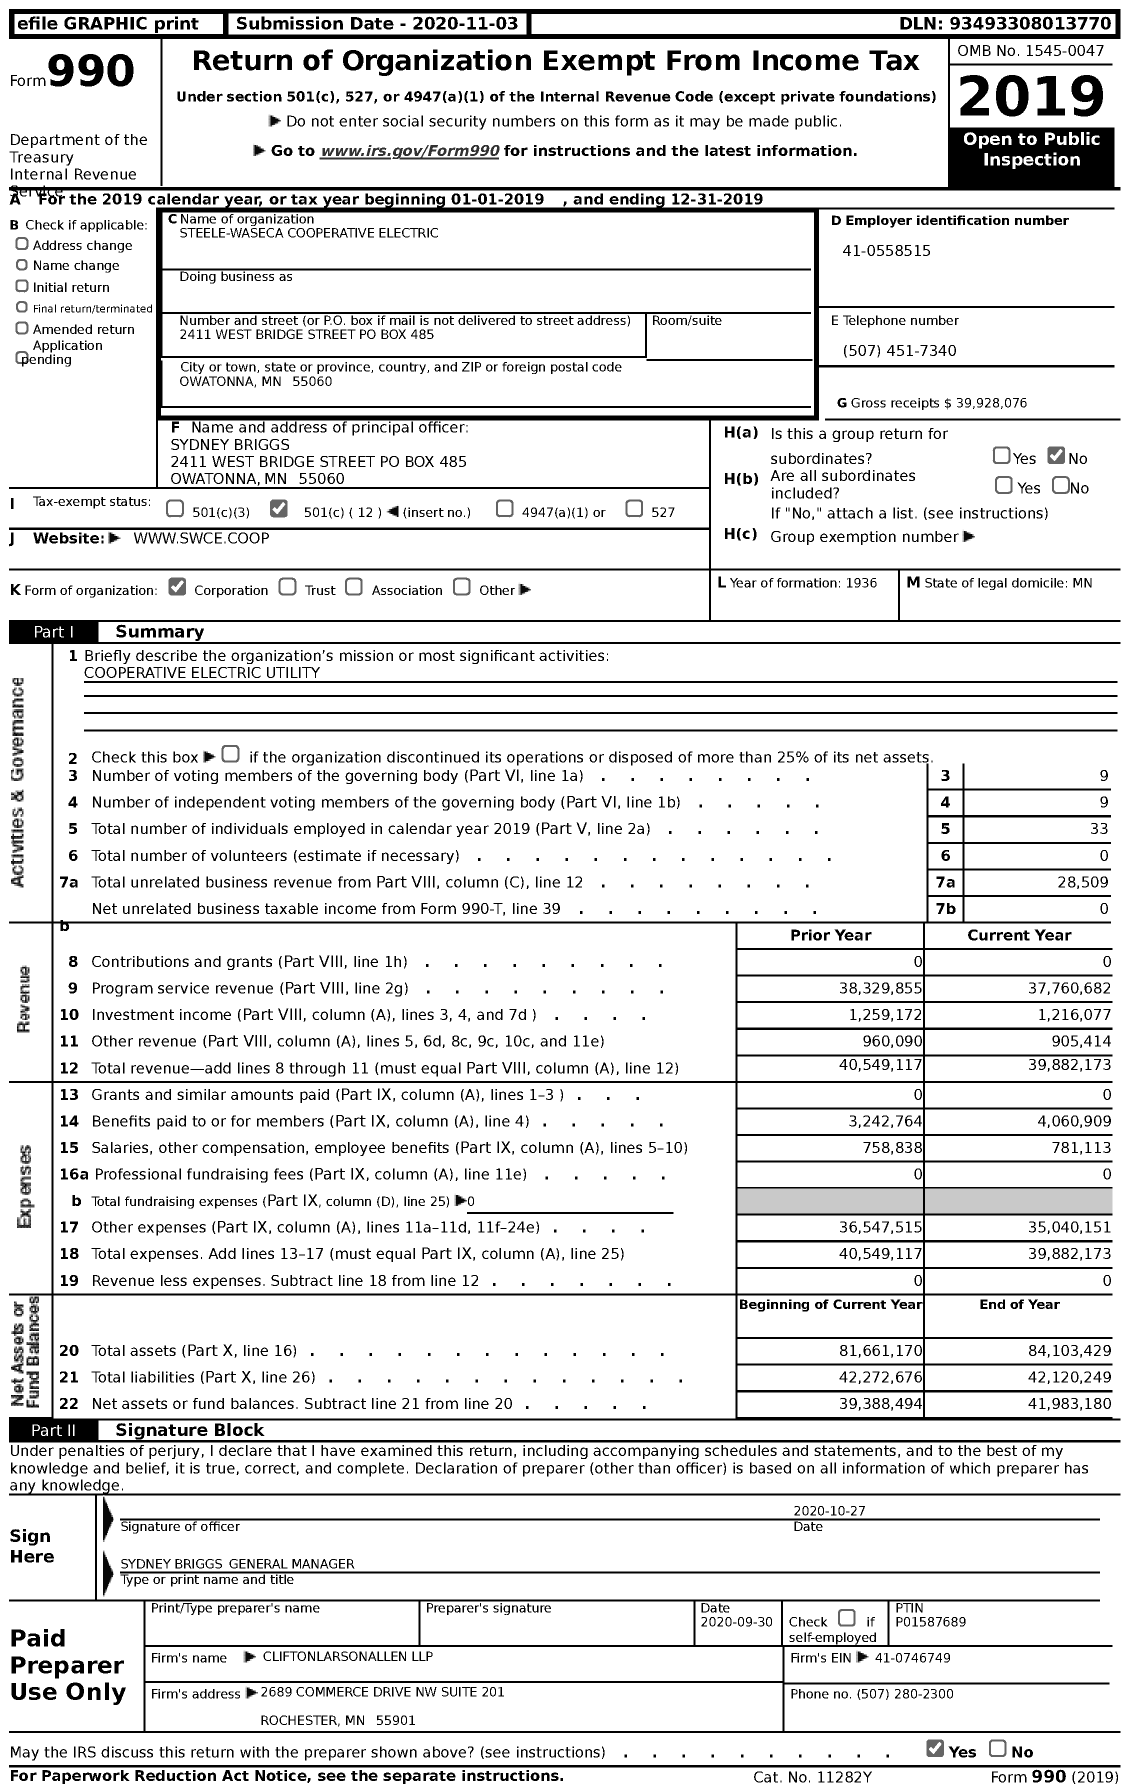 Image of first page of 2019 Form 990 for Steele-Waseca Cooperative Electric